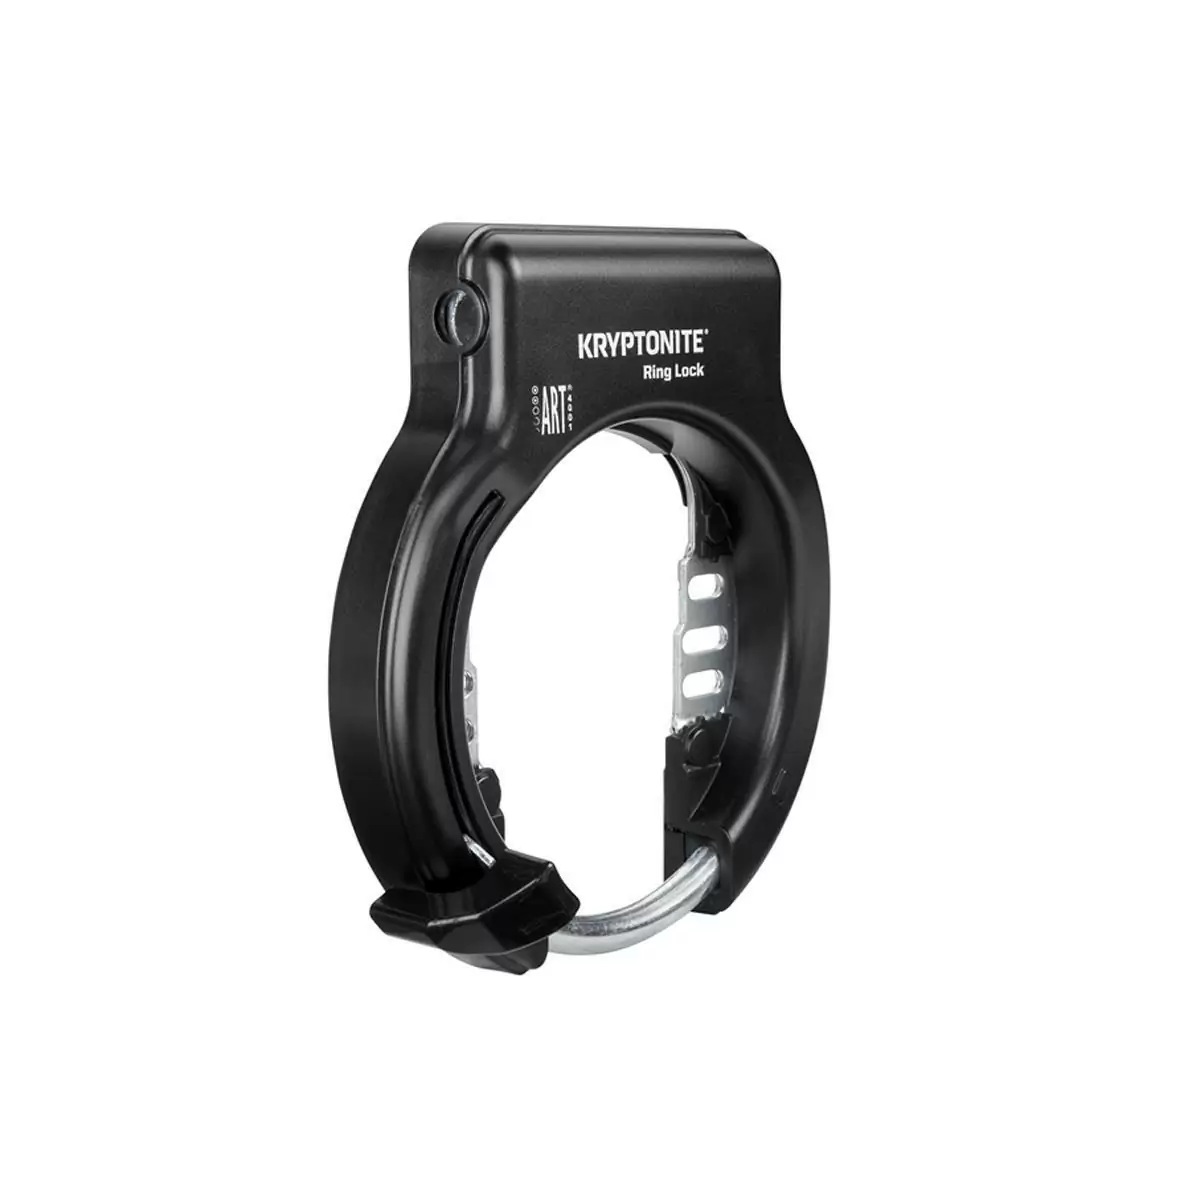 frame bike ring lock with plug in system - image